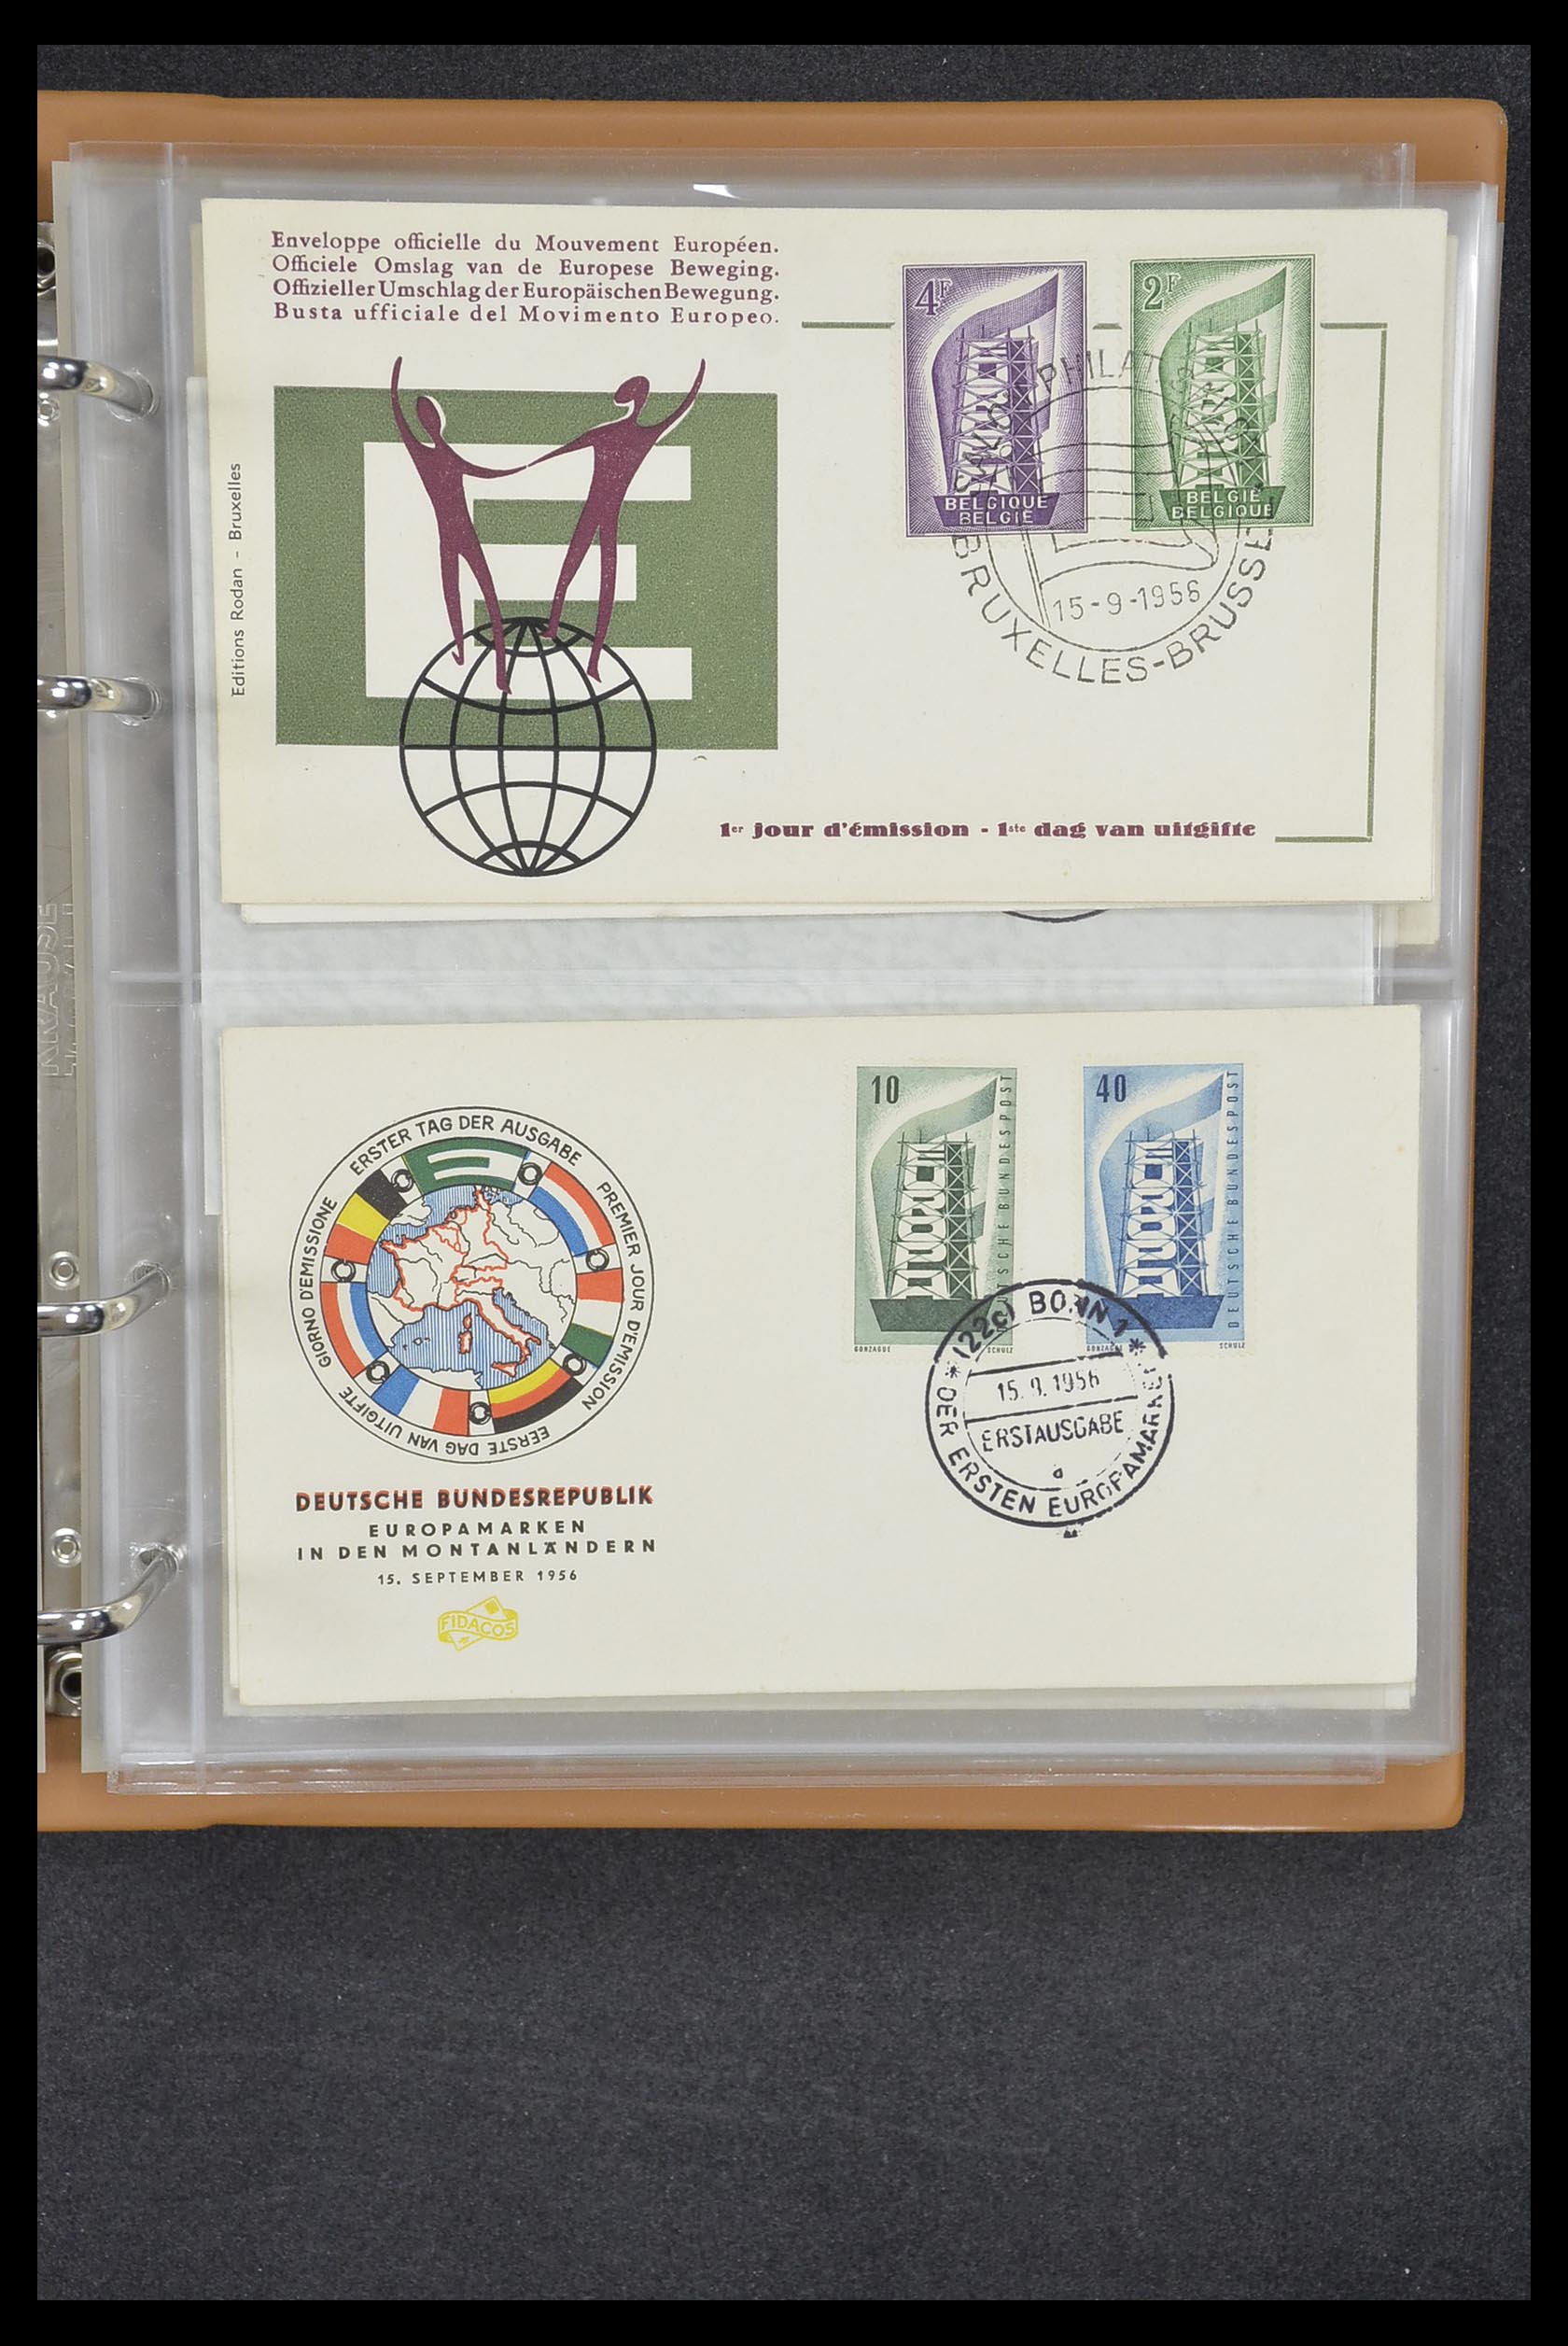 33542 125 - Stamp collection 33542 Europa Cept first day covers 1956-1999.